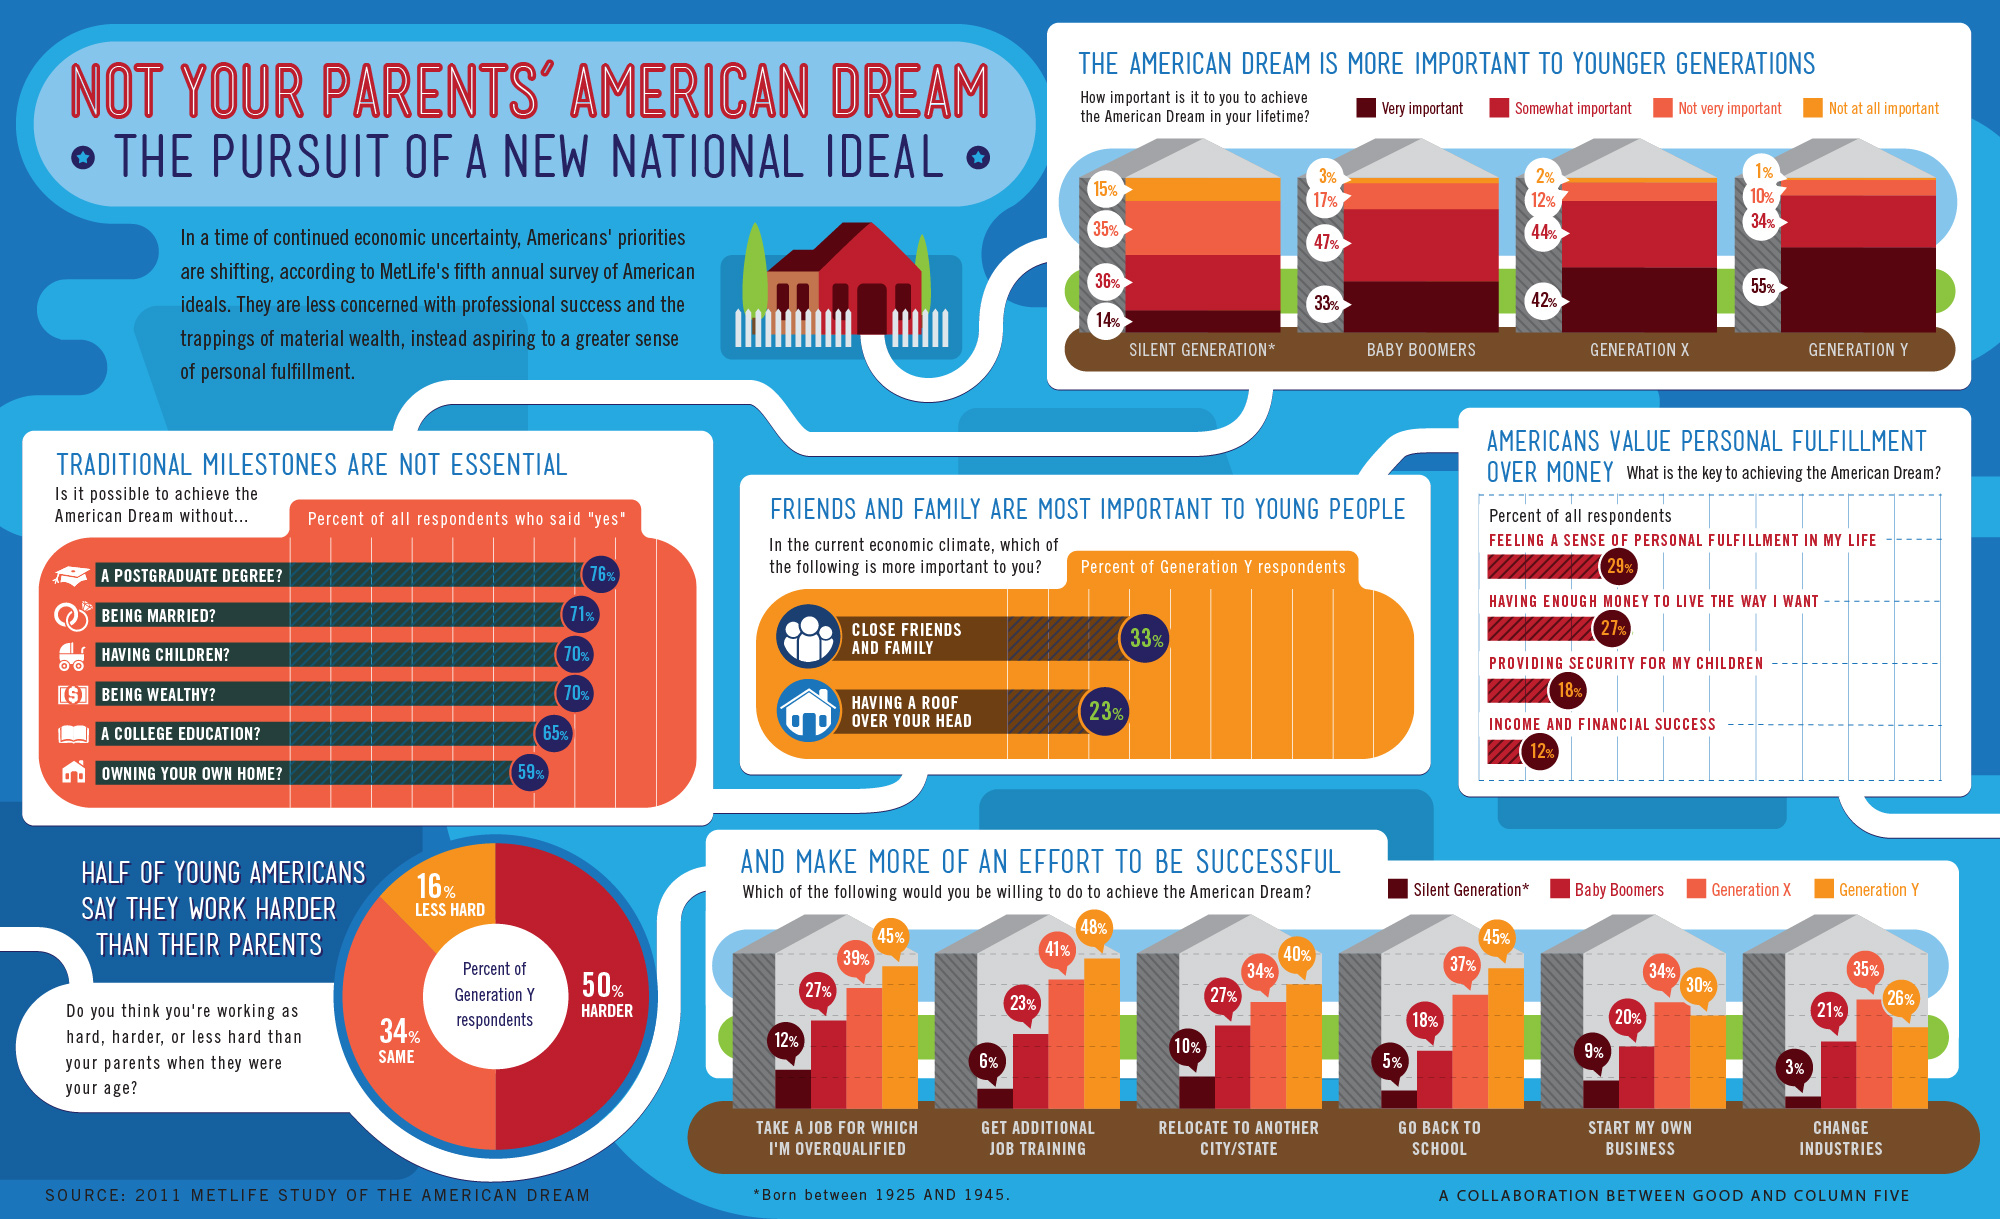 How does American Dream reflect the changing times in retail?